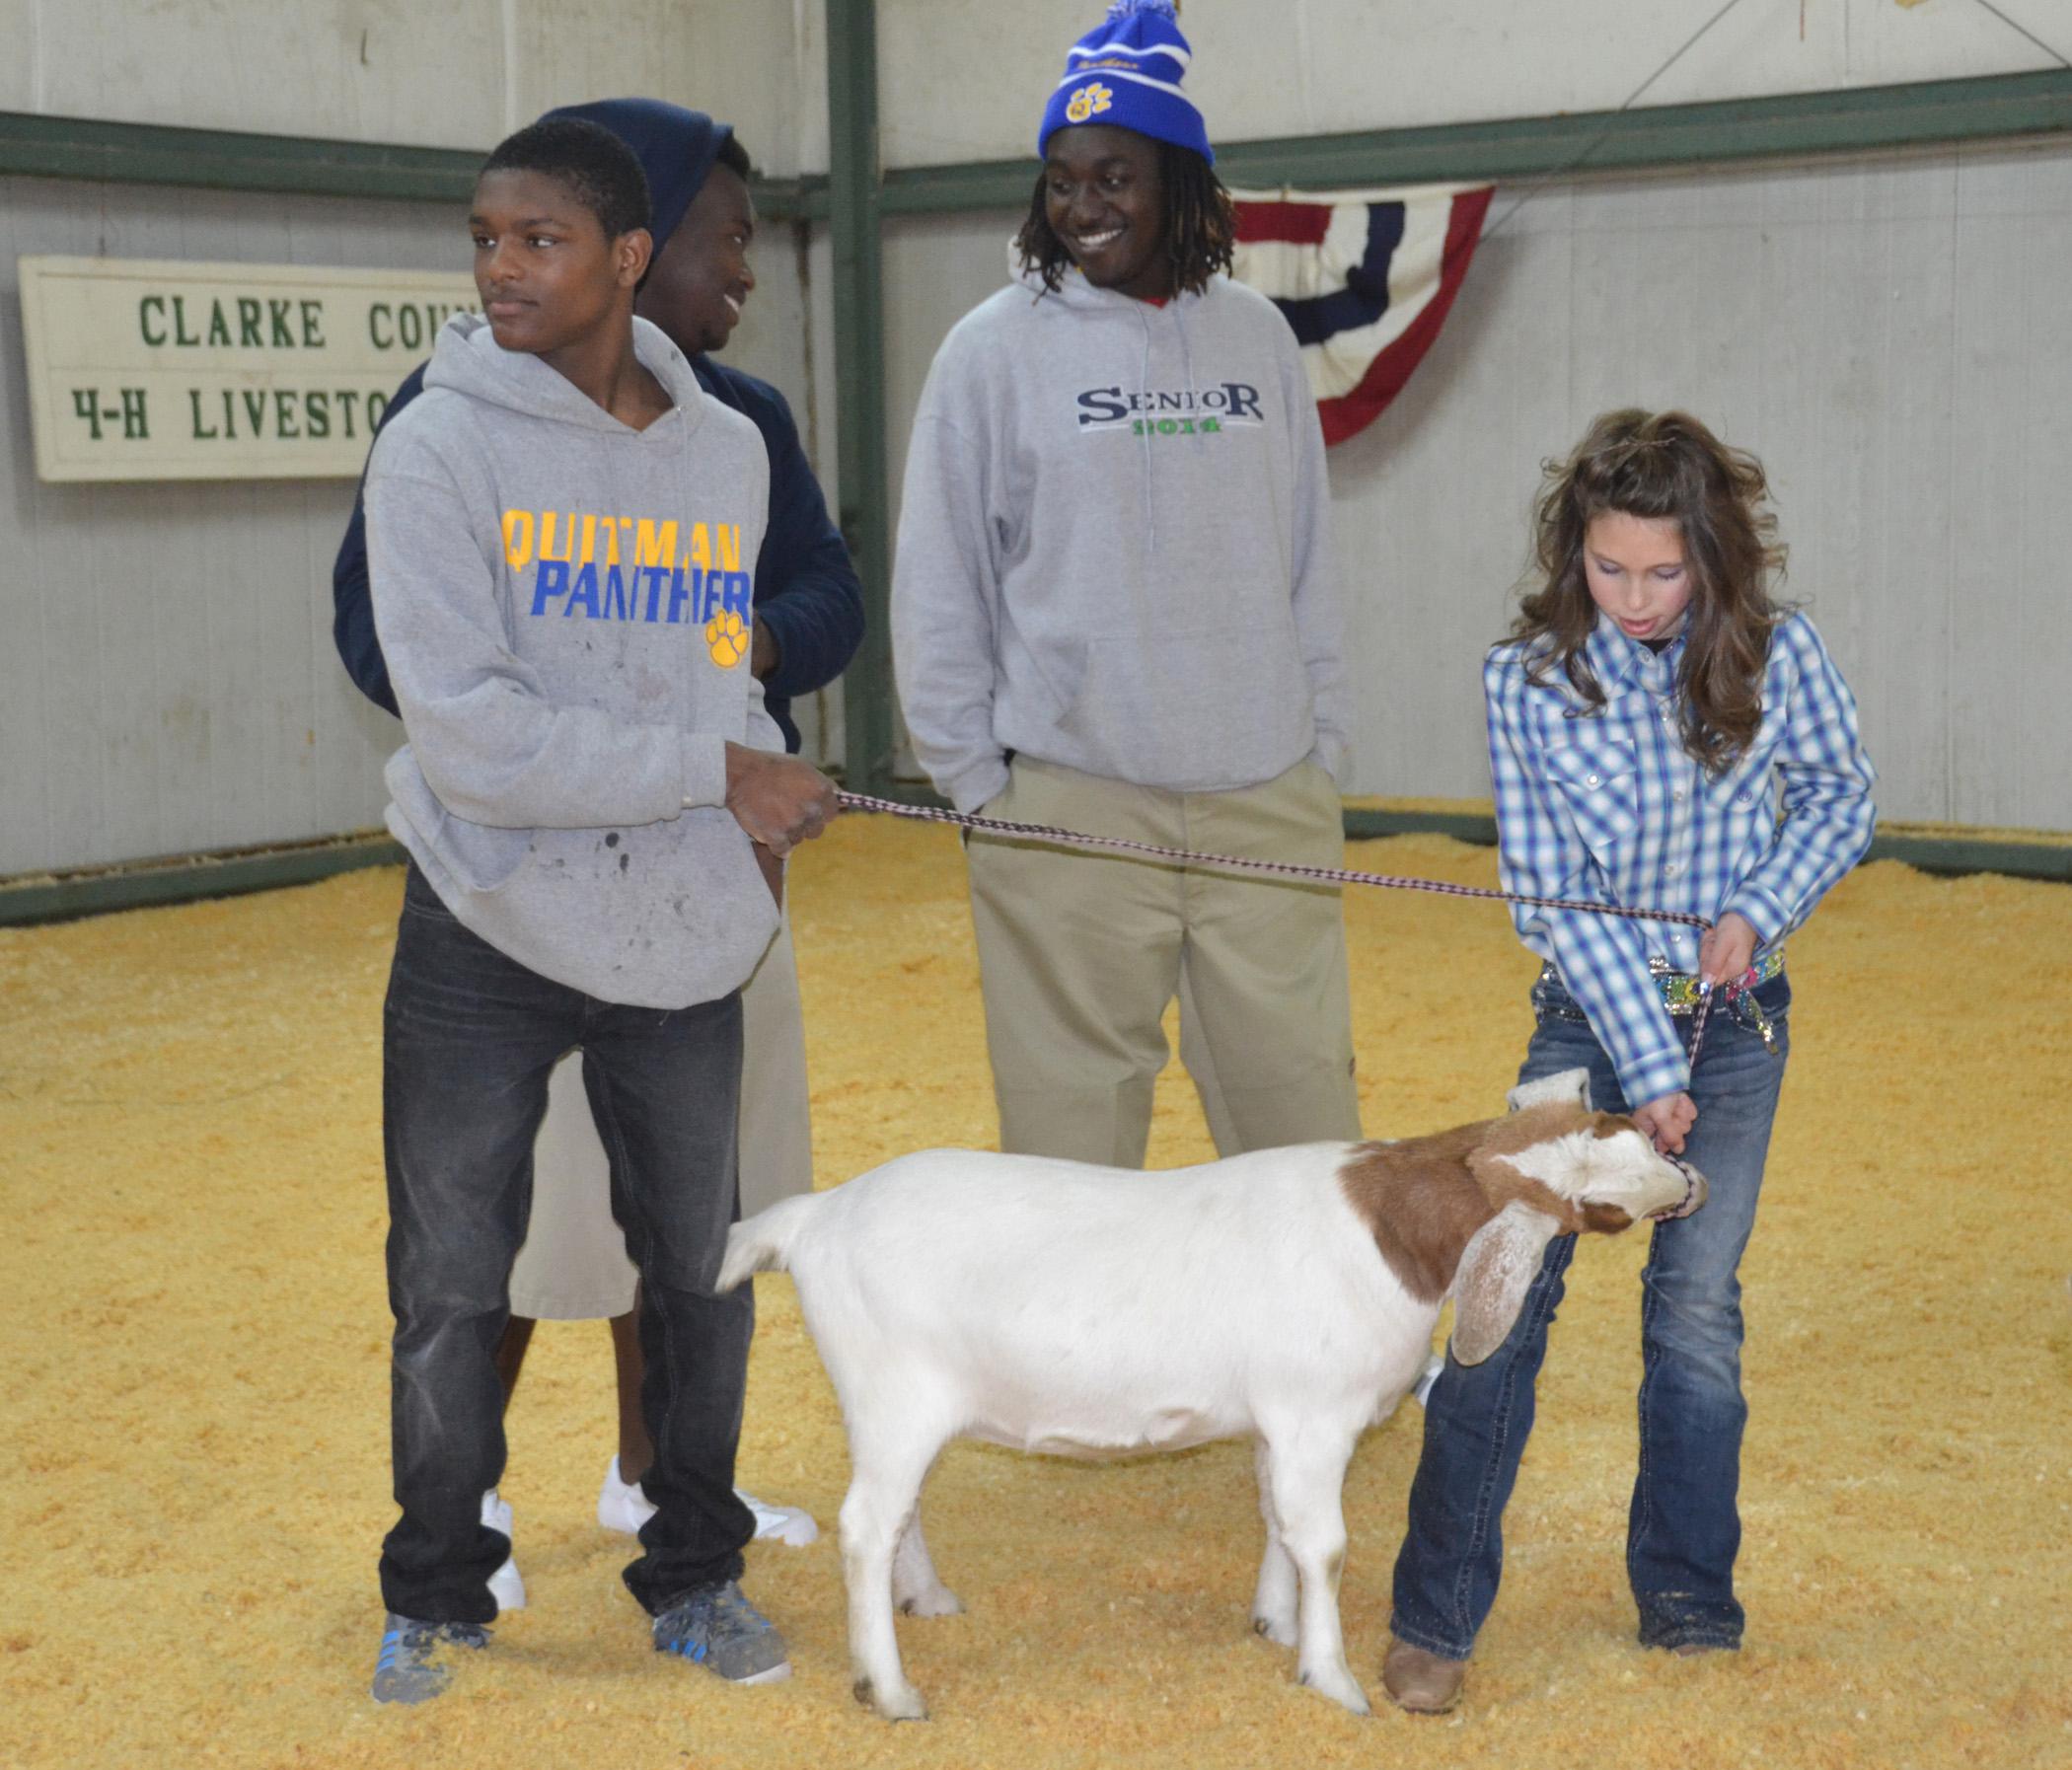 Christian Thornton, left, shows a goat with support from Lafredrick Leggett, Dykarius Arrington and Clarke County 4-H Livestock Club member Jesse Miller during the Clarke County 4-H Special Needs Livestock Show Jan. 17 in Quitman. (Photo by MSU Ag Communications/Susan Collins-Smith)